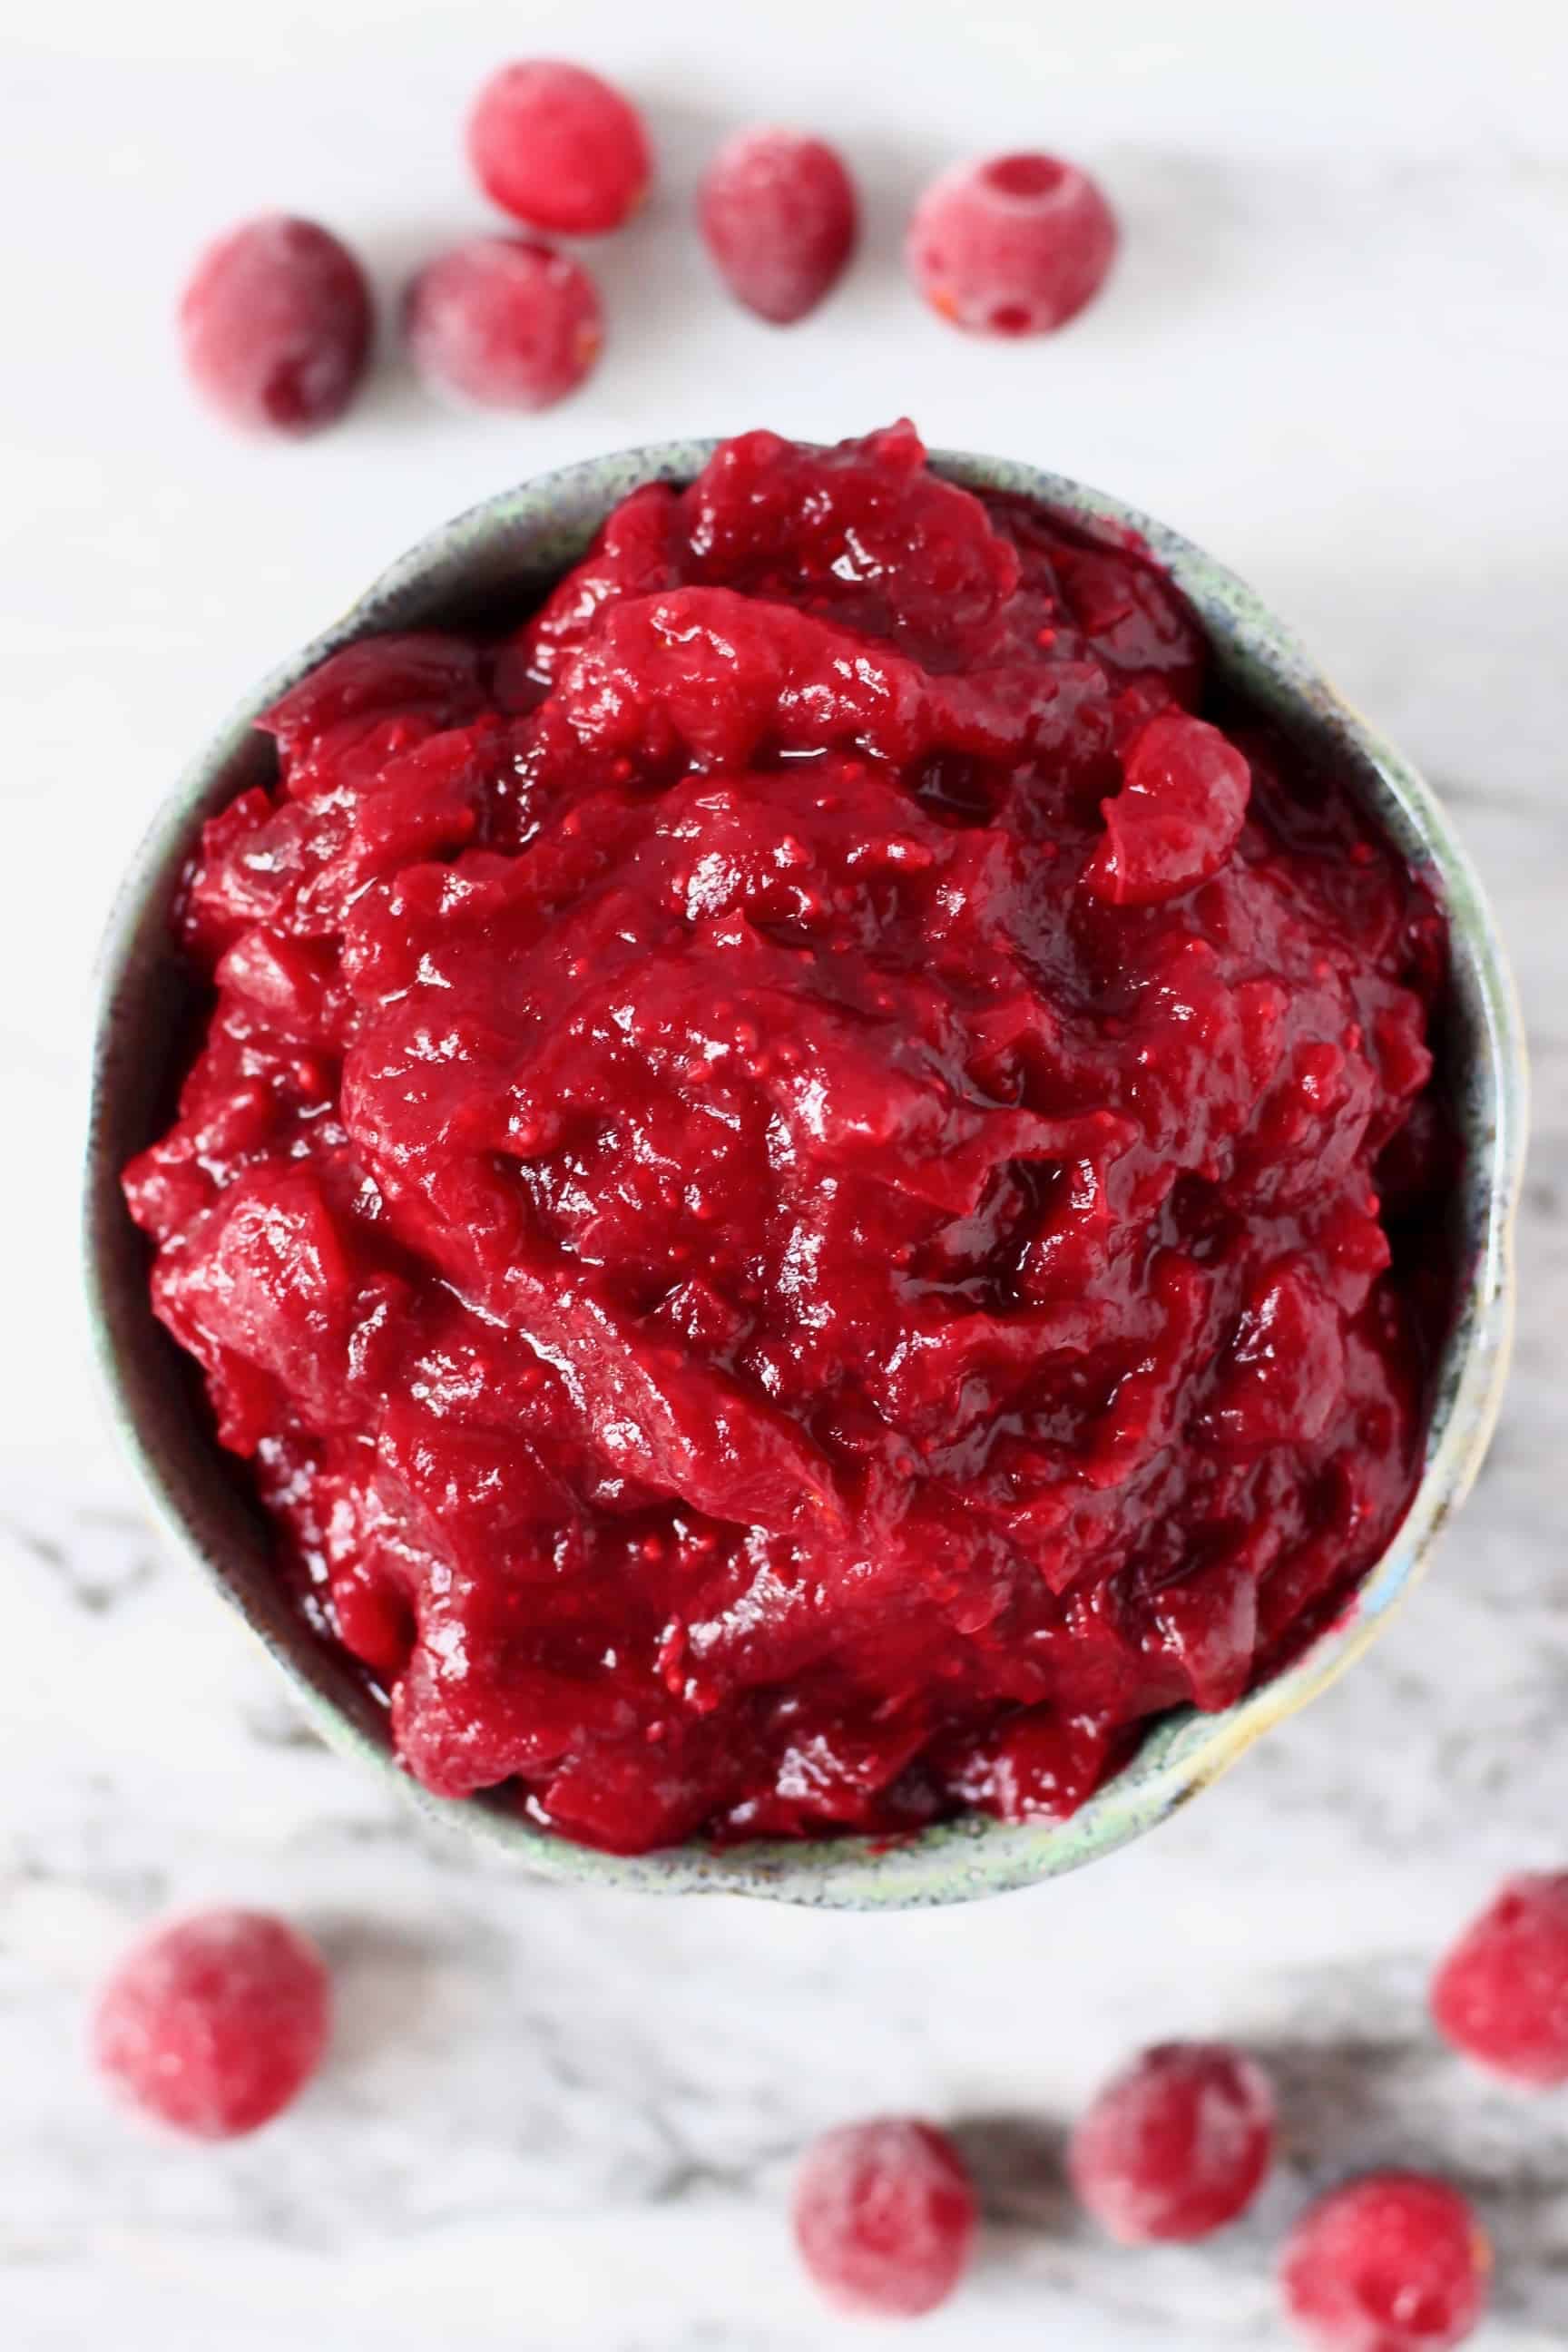 Cranberry sauce in a blue bowl against a marble background with fresh cranberries around